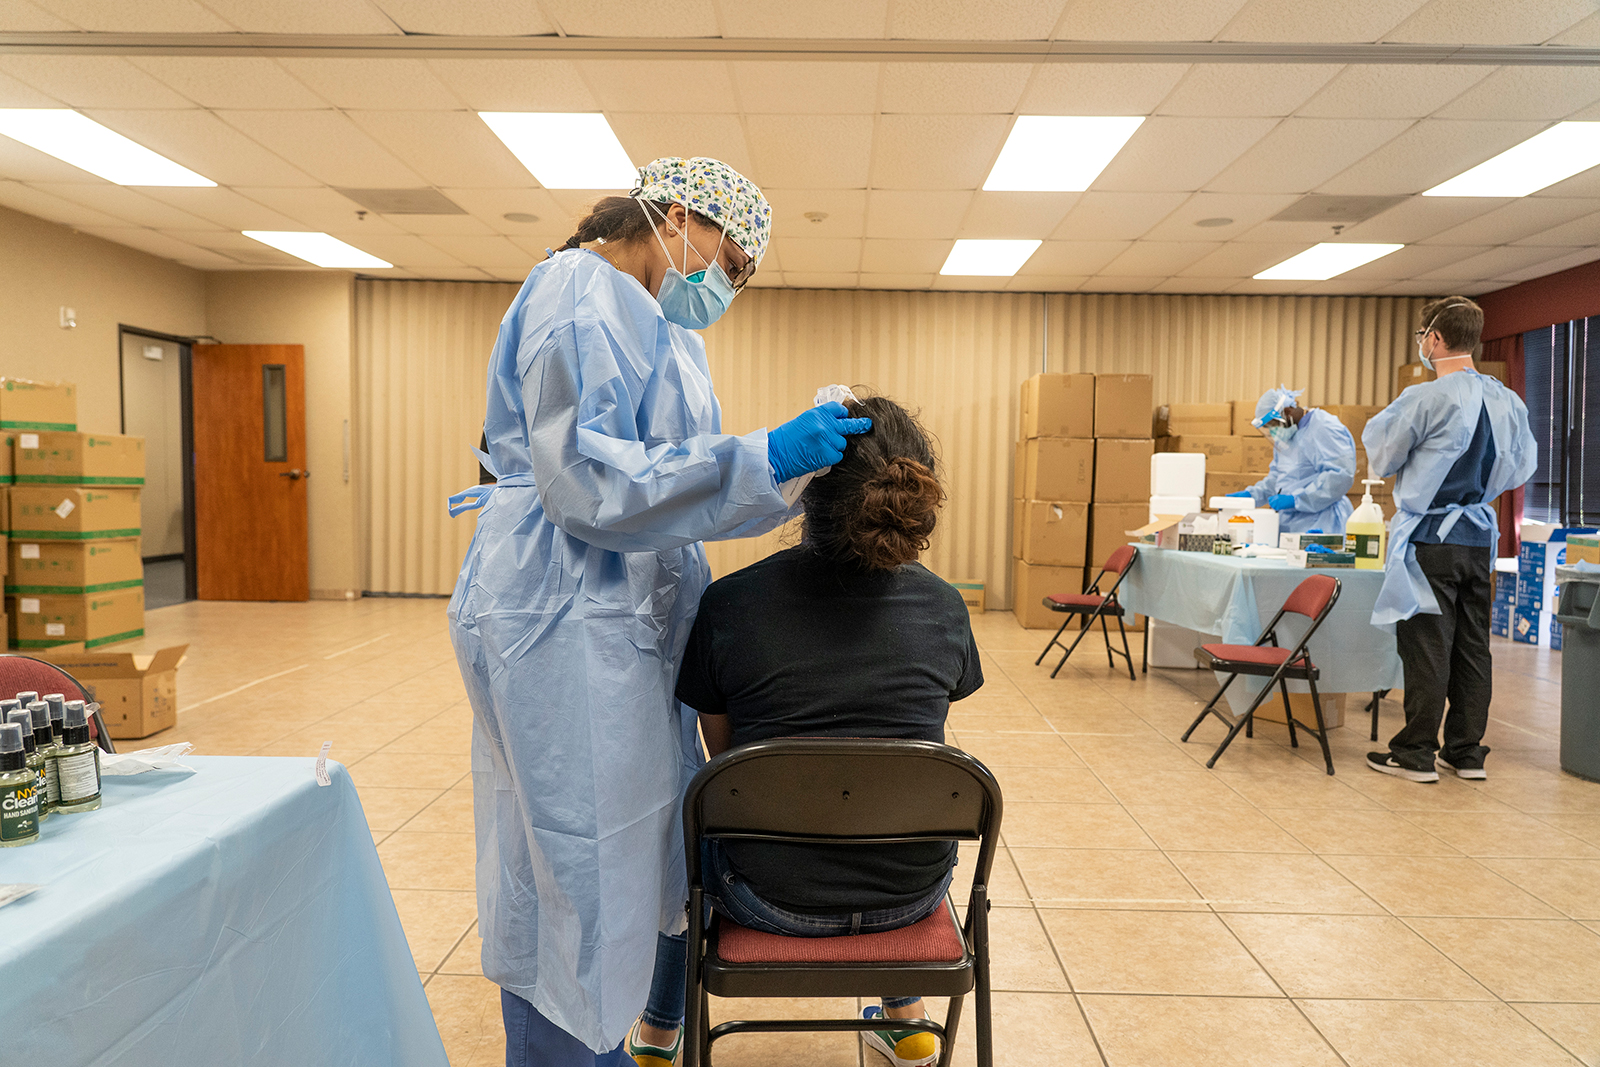 Medical workers from New York wearing personal protective equipment (PPE) test for the coronavirus at a temporary testing site in Houston on July 17.